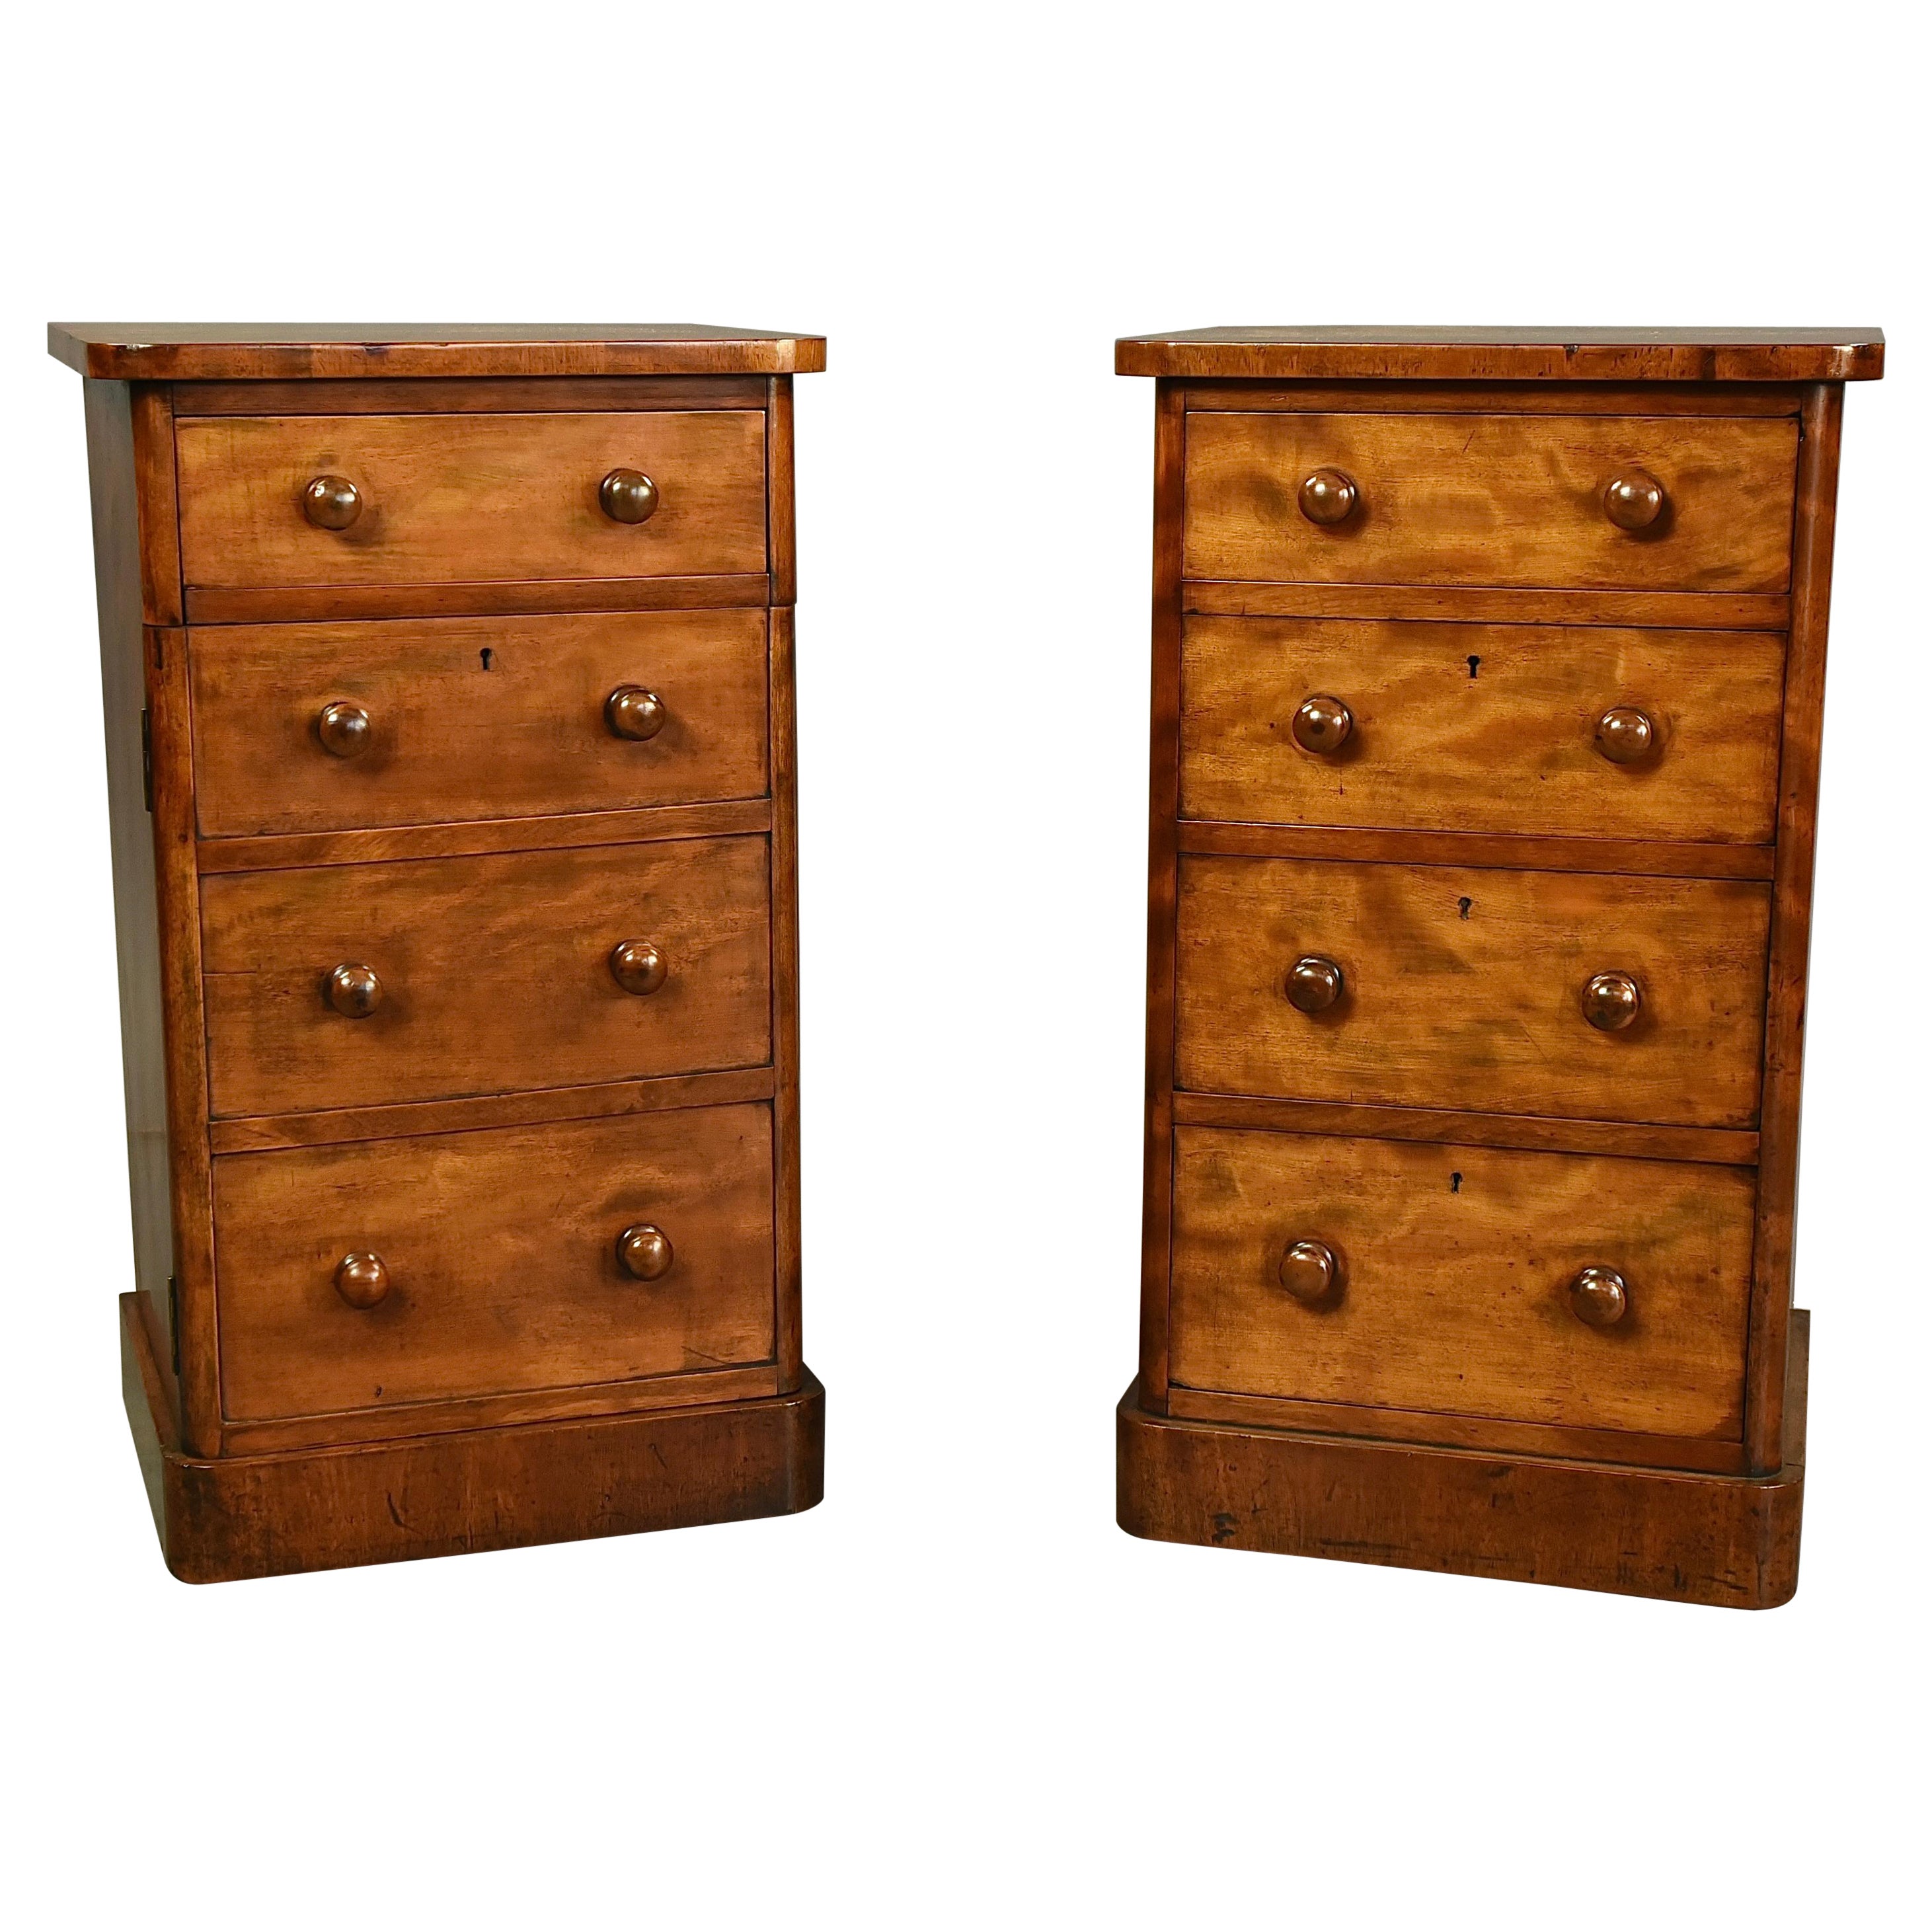 19th century pair of Antique satin walnut bedside chests of drawers nite stands